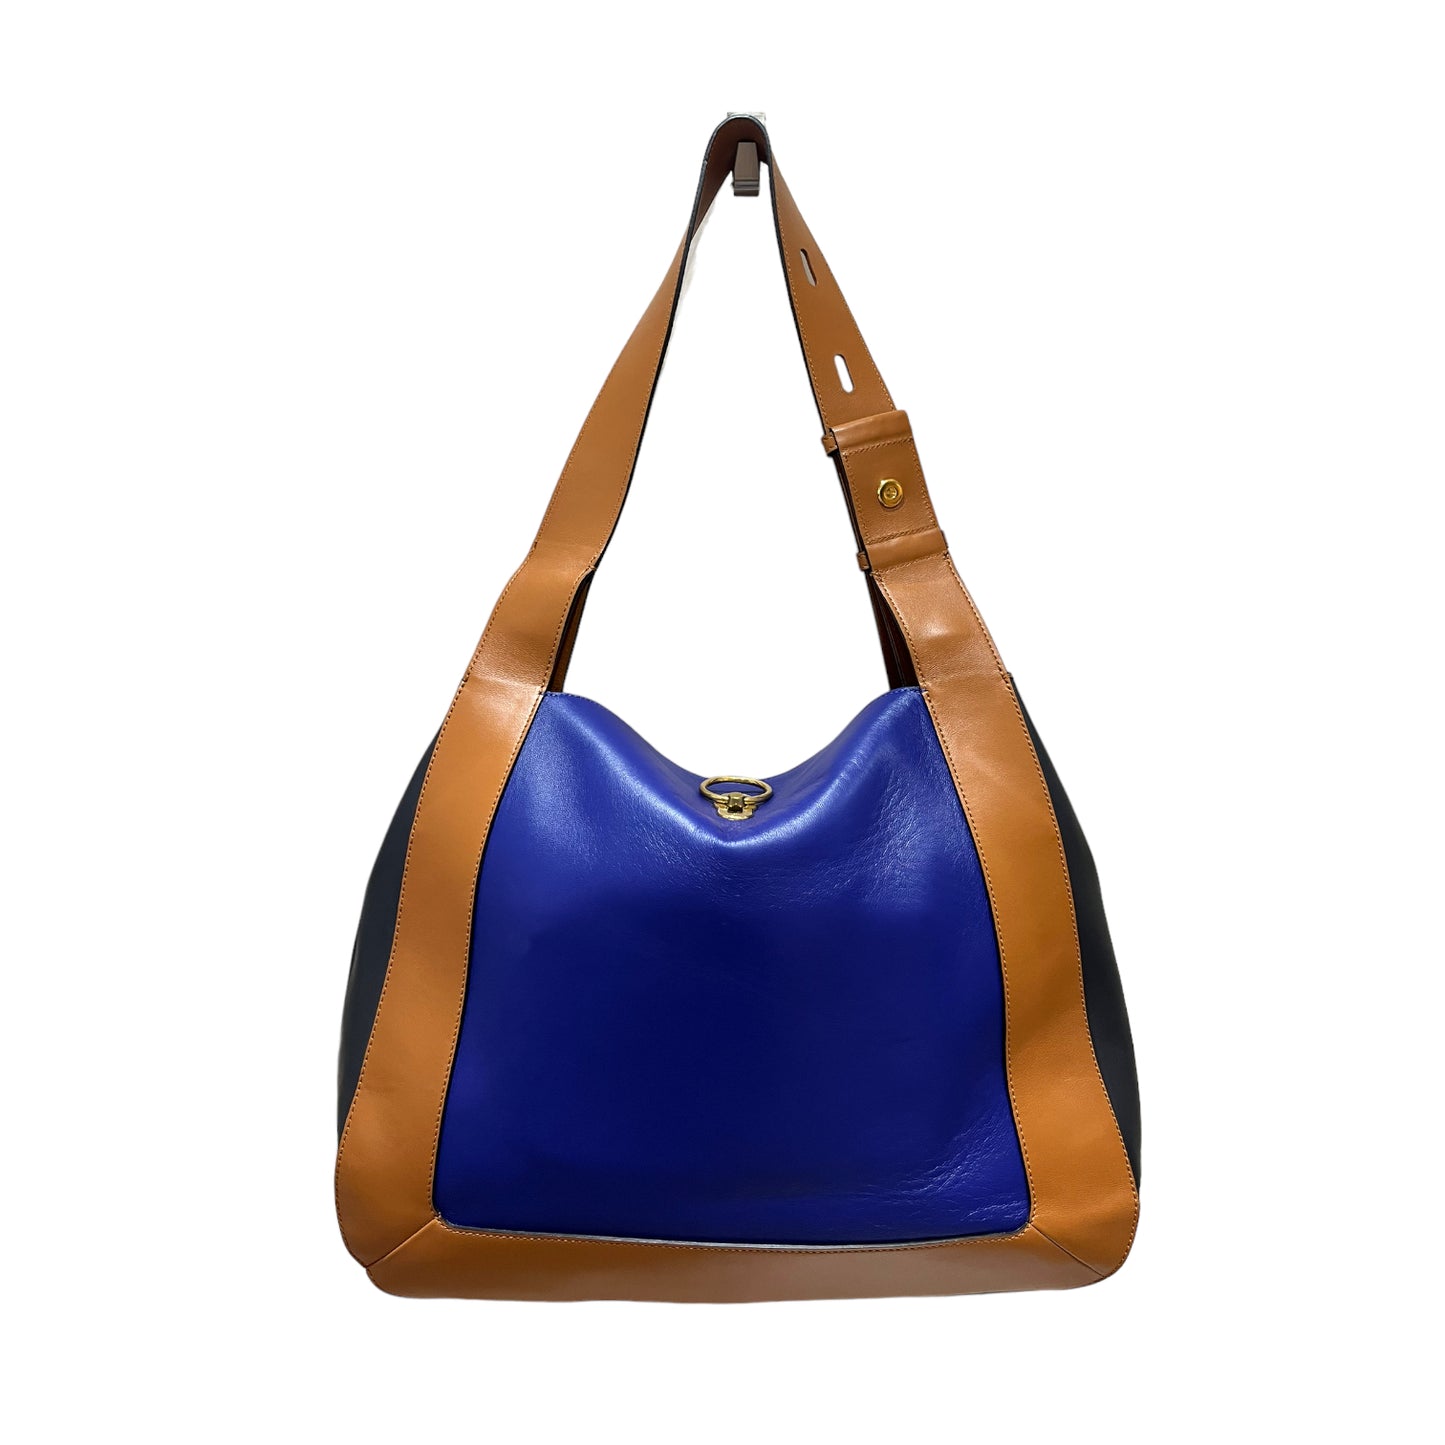 Mulberry Blue, Tan and Black Marloes Hobo Bag